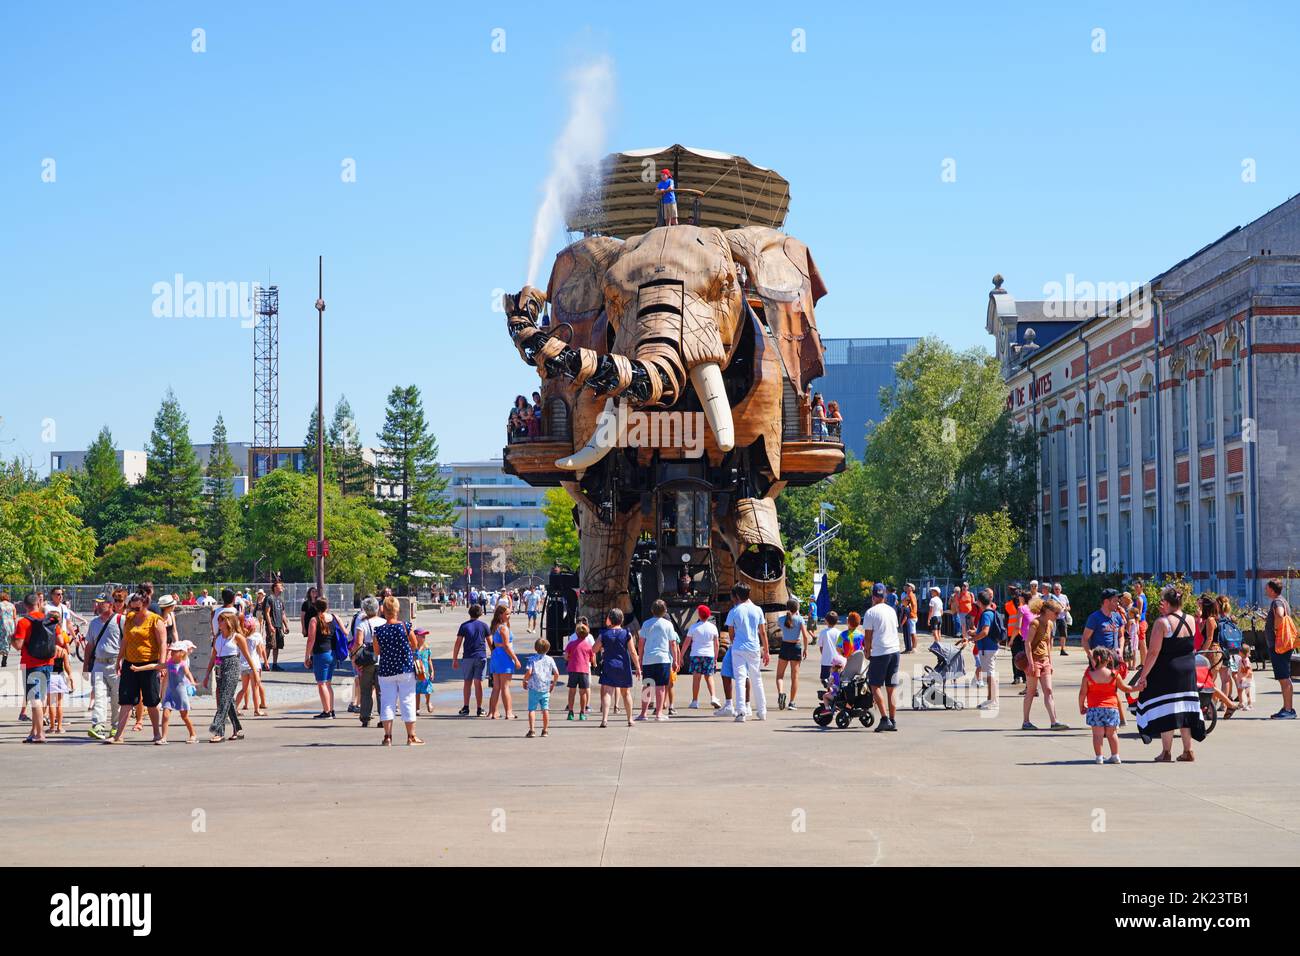 NANTES, FRANCE -10 AUG 2022- View of the Great Elephant, a giant wooden mechanical elephant at the Machines of the Isle of Nantes, France. Stock Photo